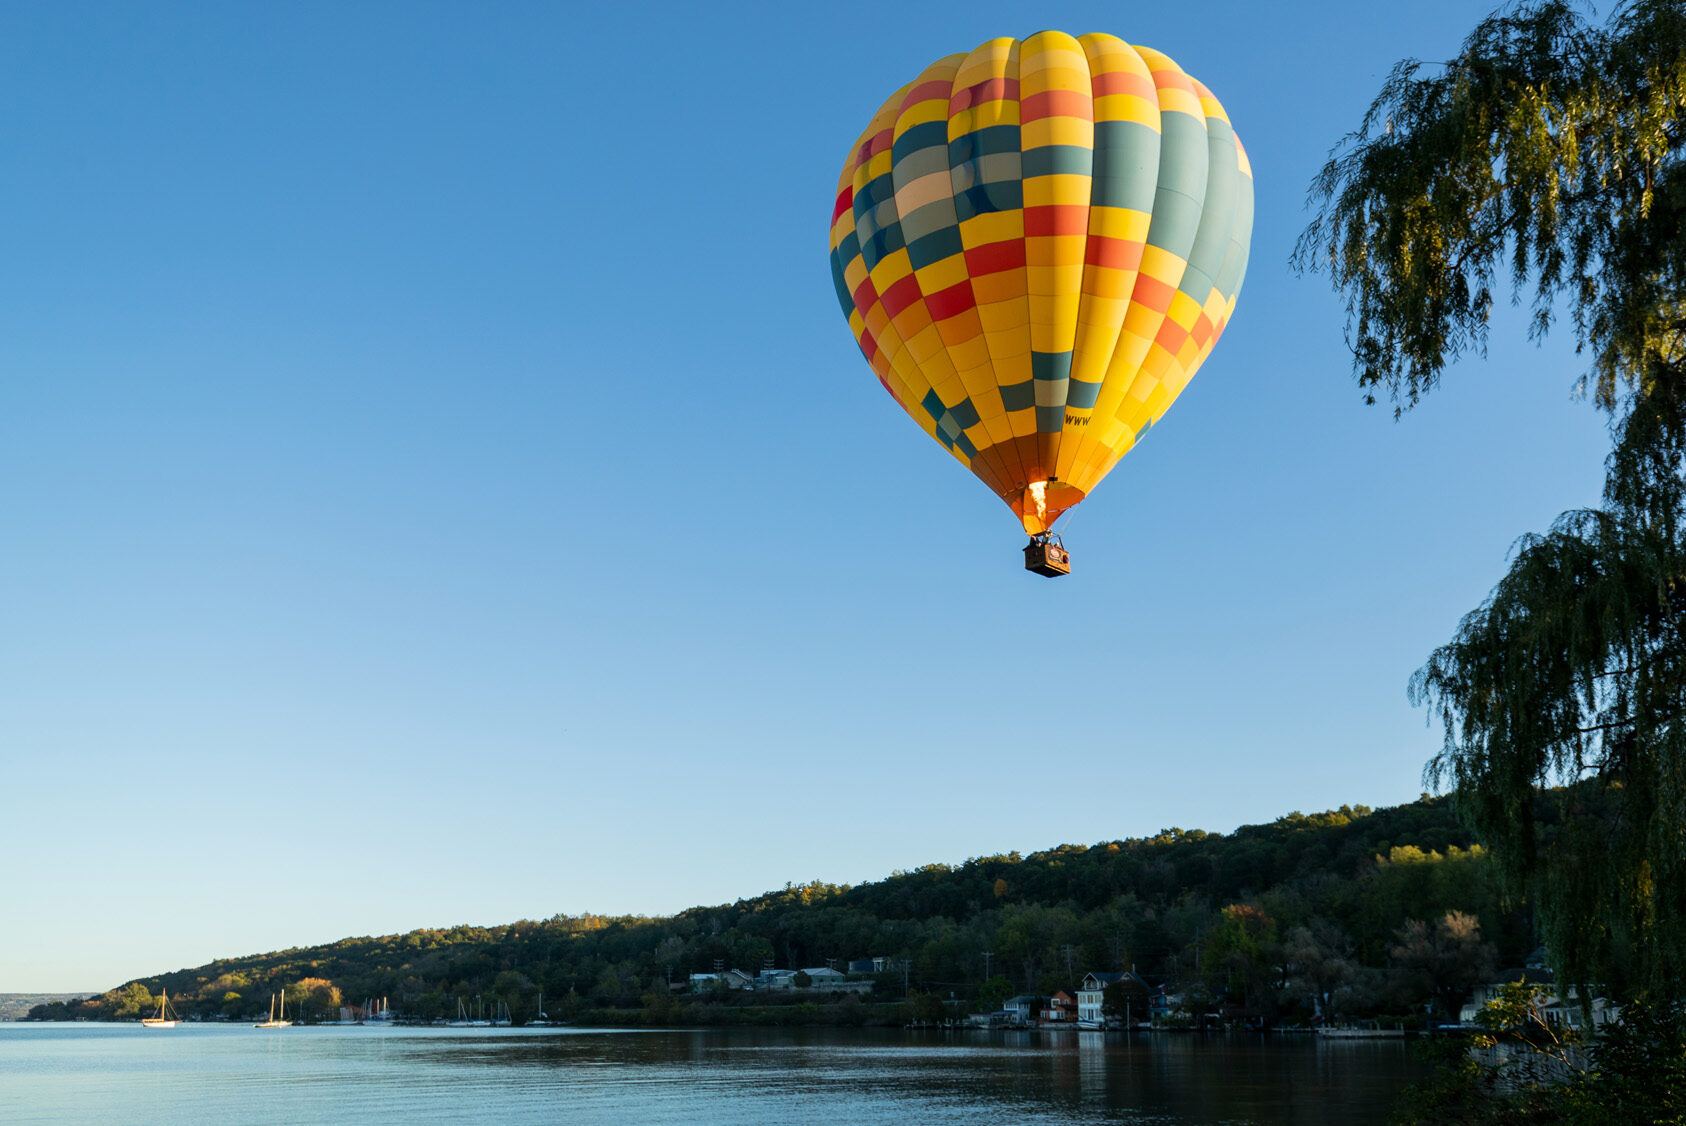 A hot air balloon soars over Cayuga Lake in Upstate New York